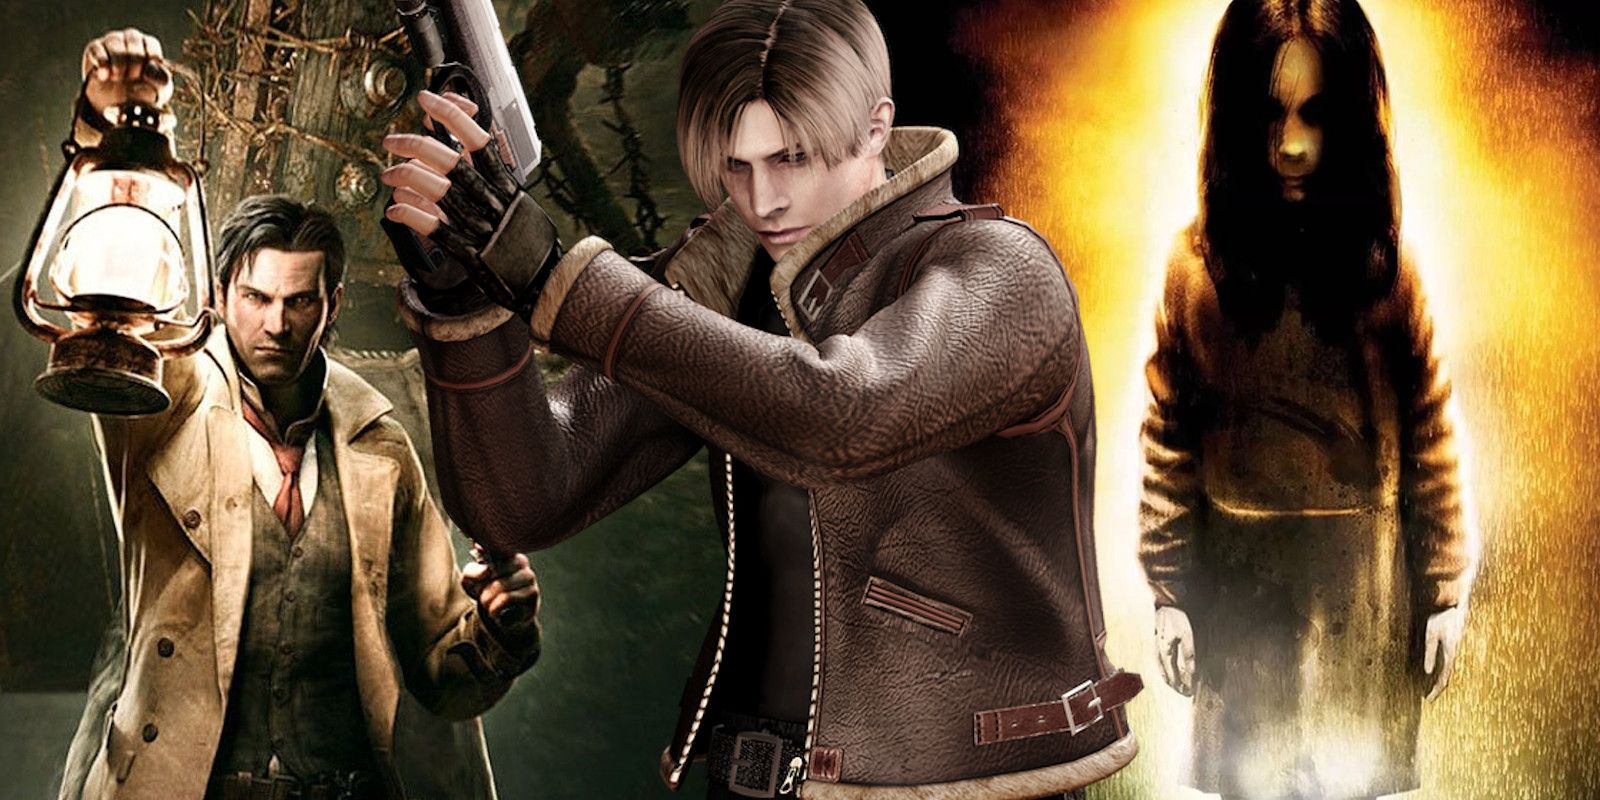 Characters from The Evil Within, Resident Evil 4, and F.E.A.R.